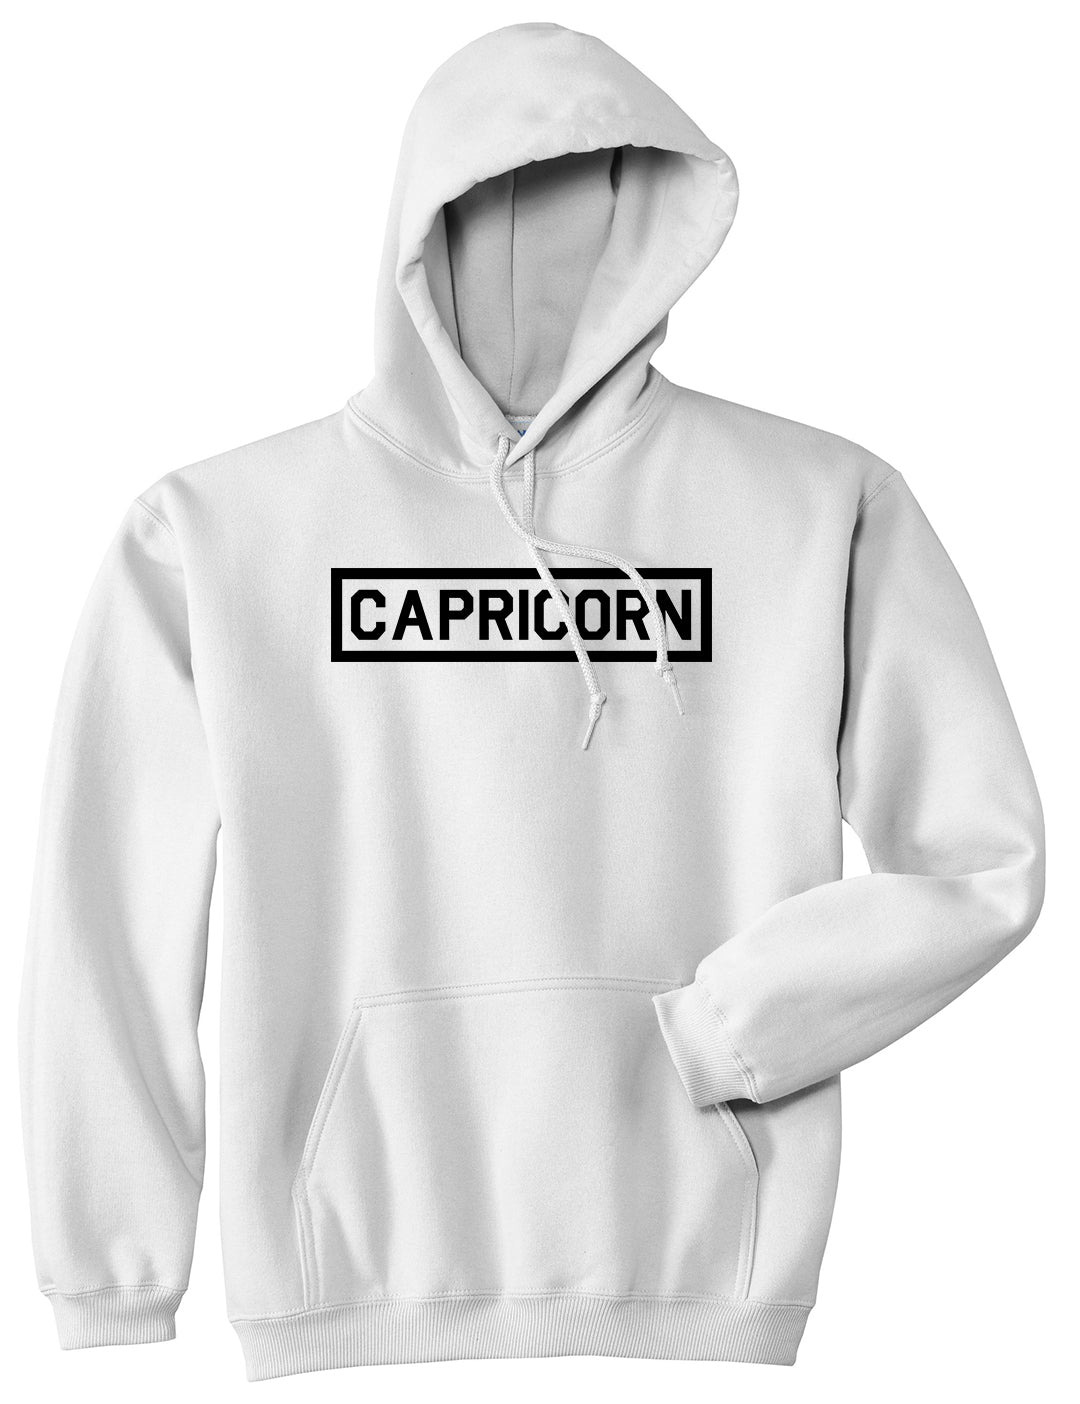 Capricorn Horoscope Sign Mens White Pullover Hoodie by KINGS OF NY